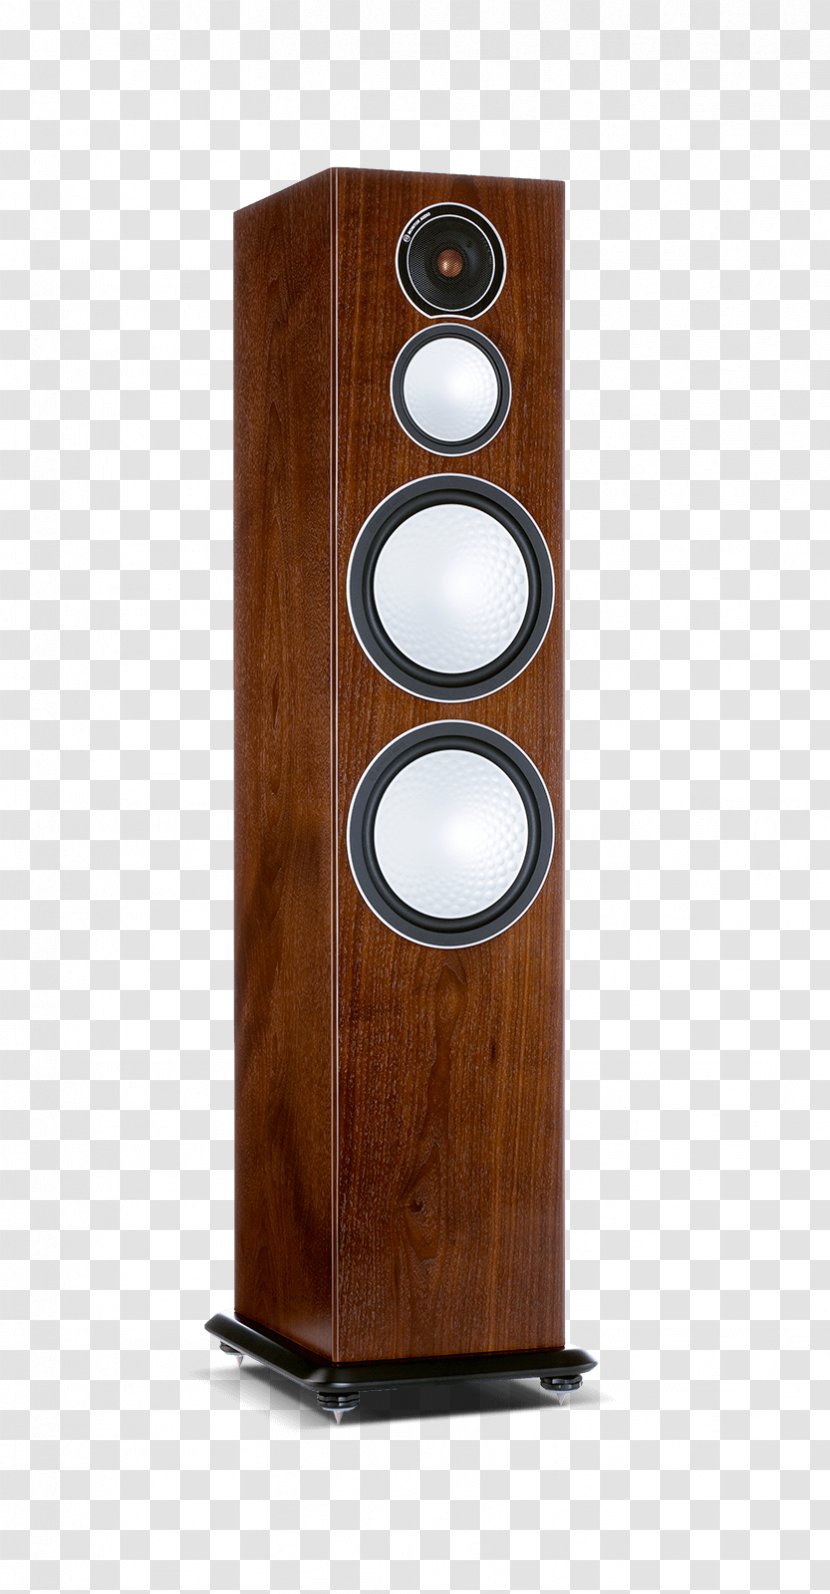 Loudspeaker Monitor Audio Computer Speakers Sound - Stereophonic Transparent PNG